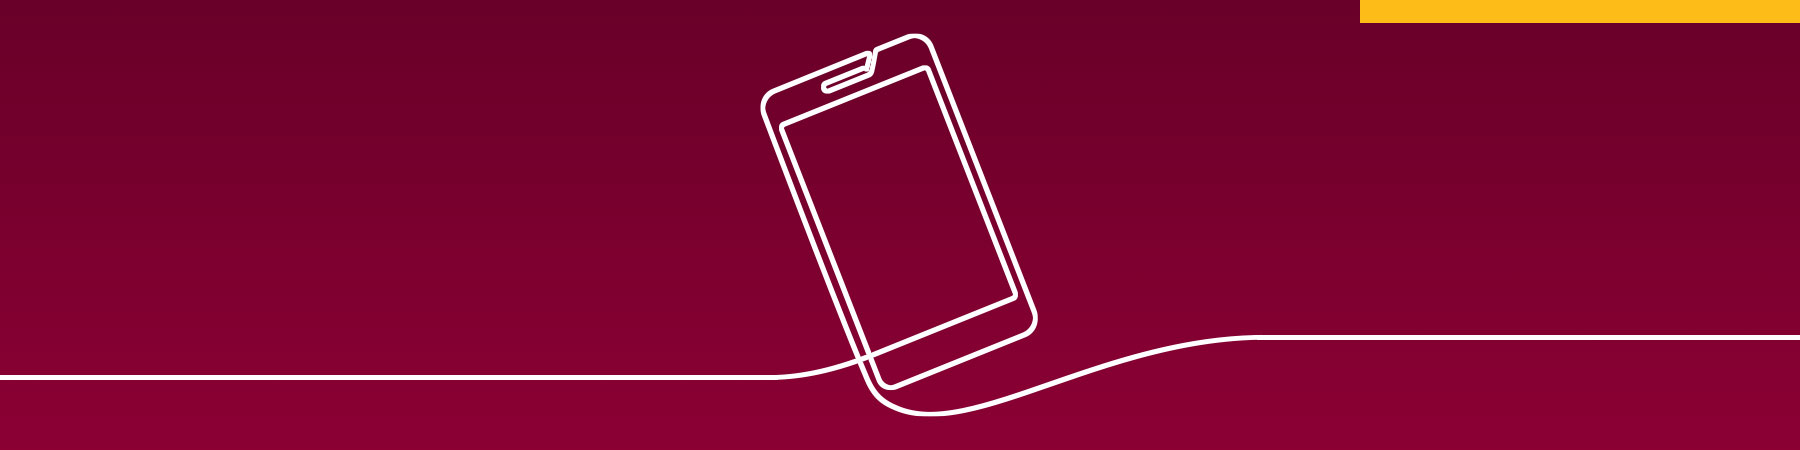 White line illustration of a mobile phone, against a maroon background, to demonstrate Loyola University Chicago's social media efforts.